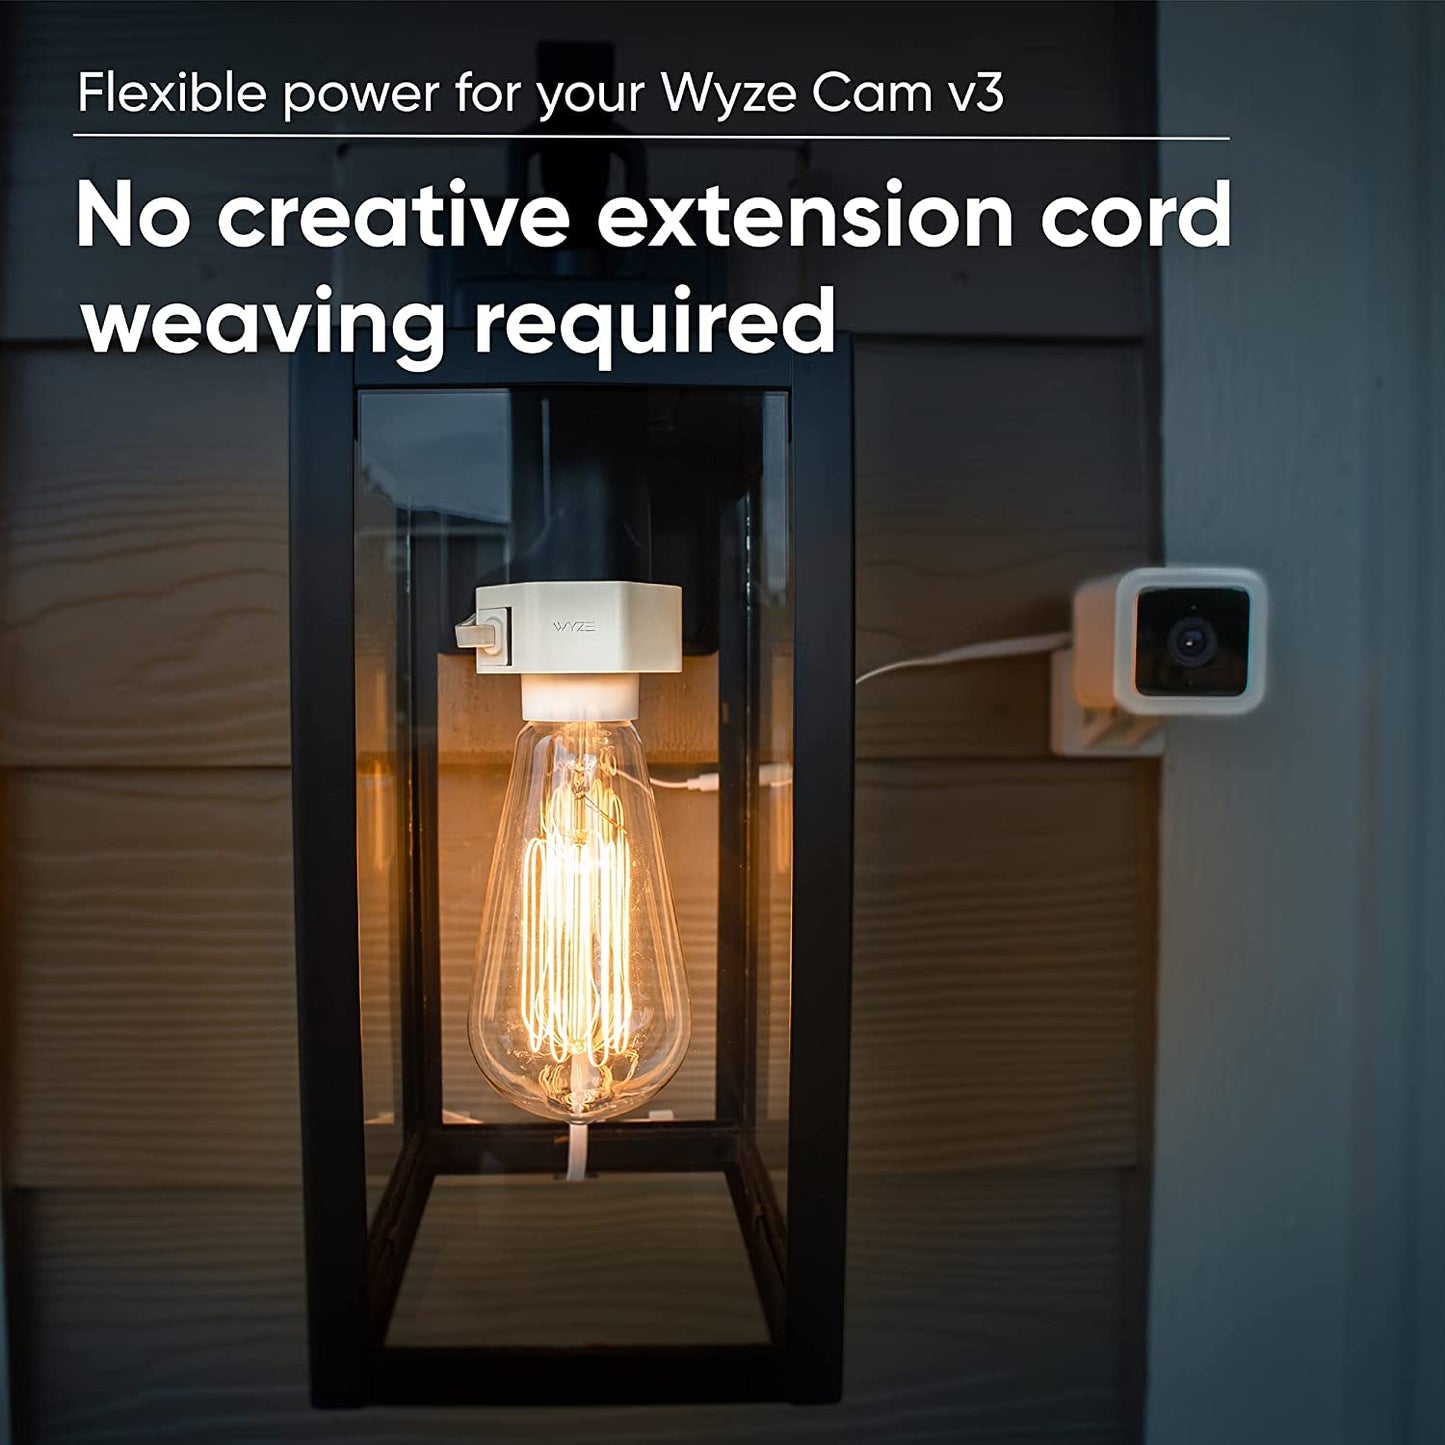 Cam v3 plugged into a Wyze Lamp Socket that is powered by the same source.